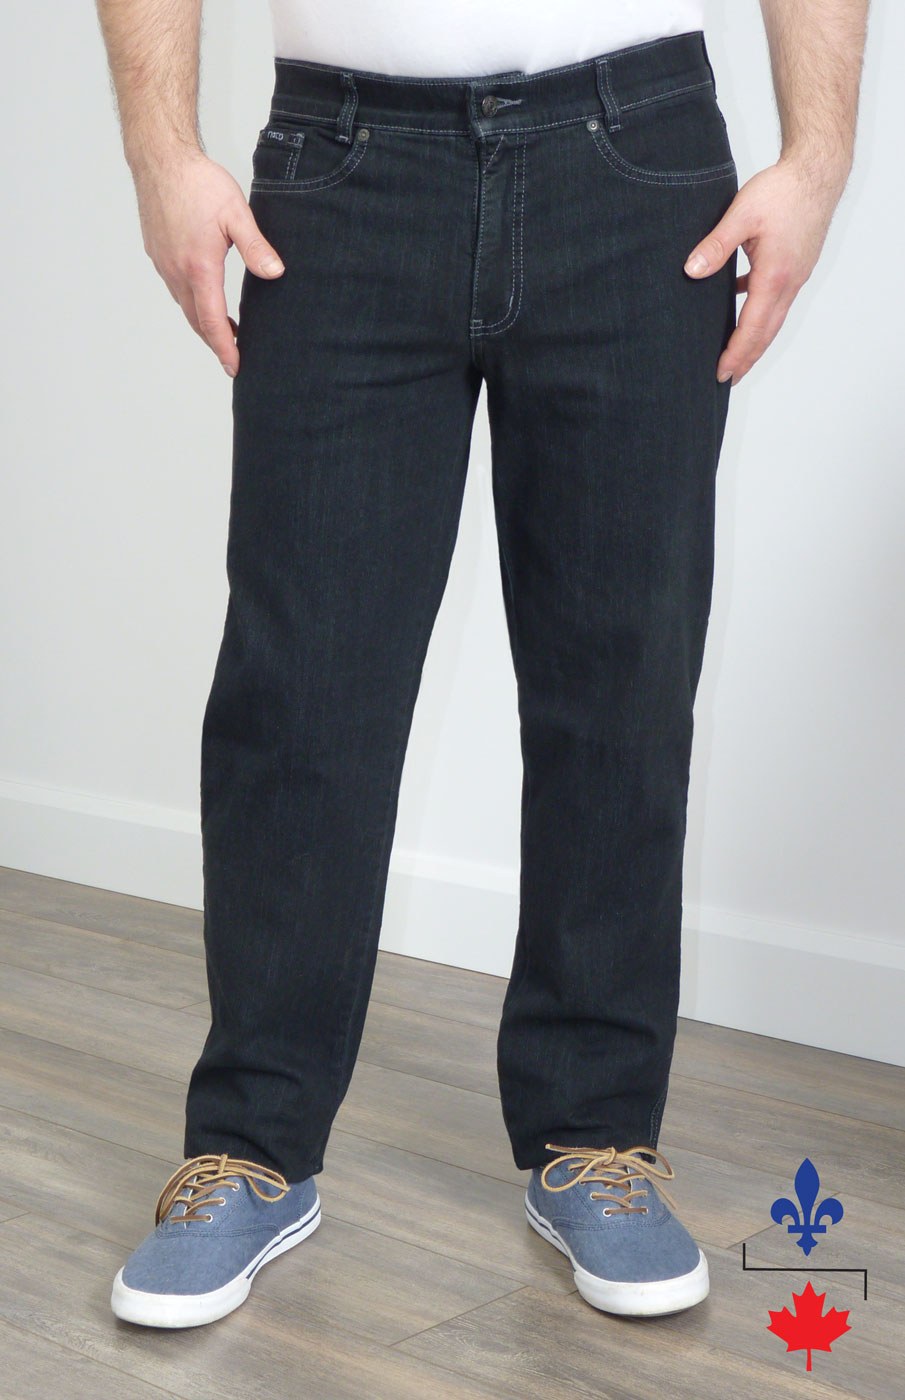 Straight leg Made In Canada Jean Stretch fabric : 77% Cotton, 21% Polyester, 2% Spandex
Stretch Waistband